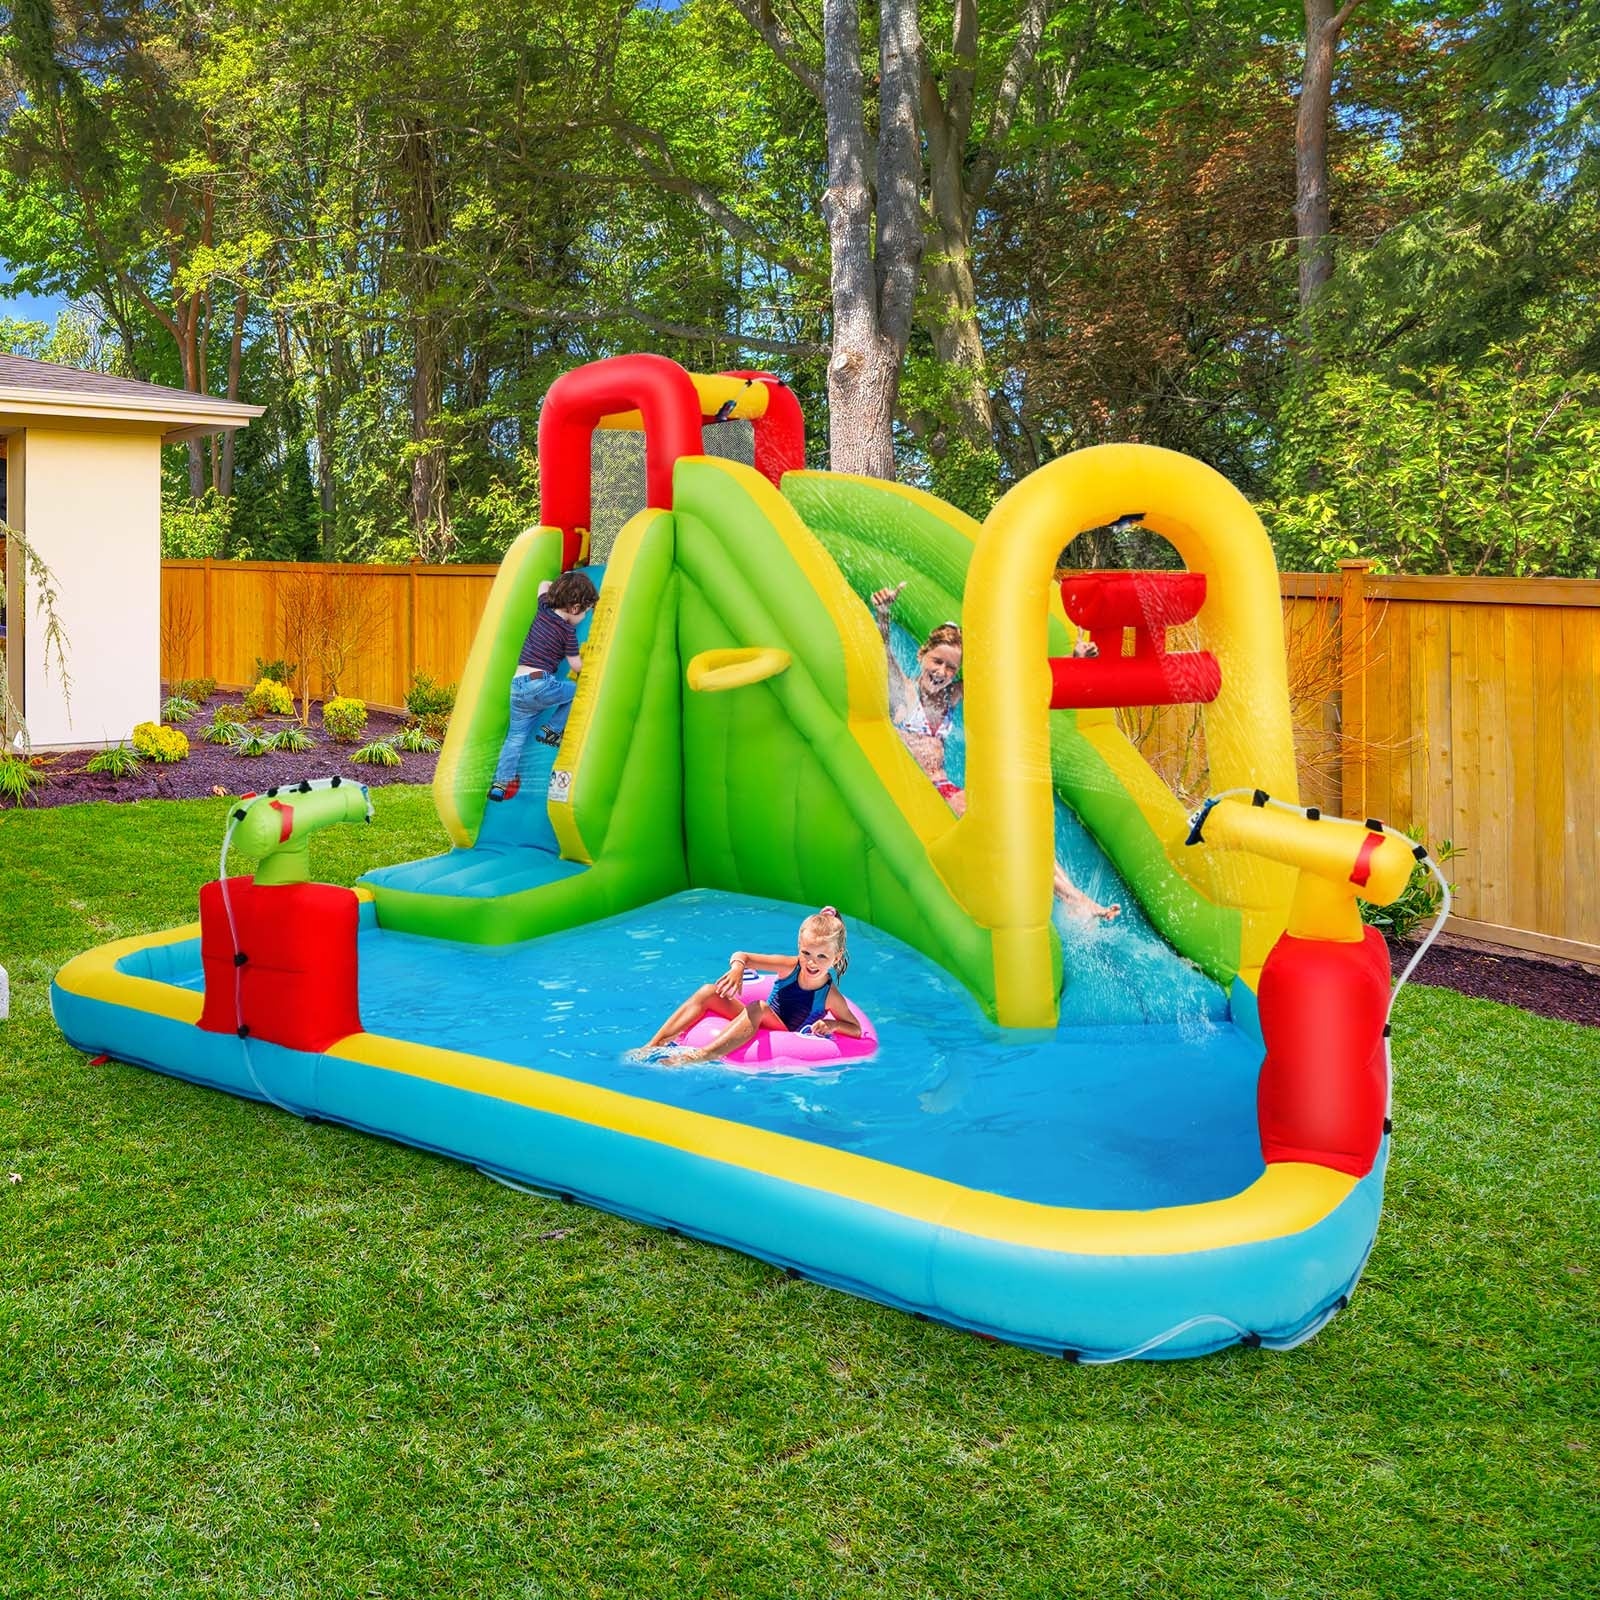 Hikidspace Inflatable Splash Jump Slide Water Bounce without Blower